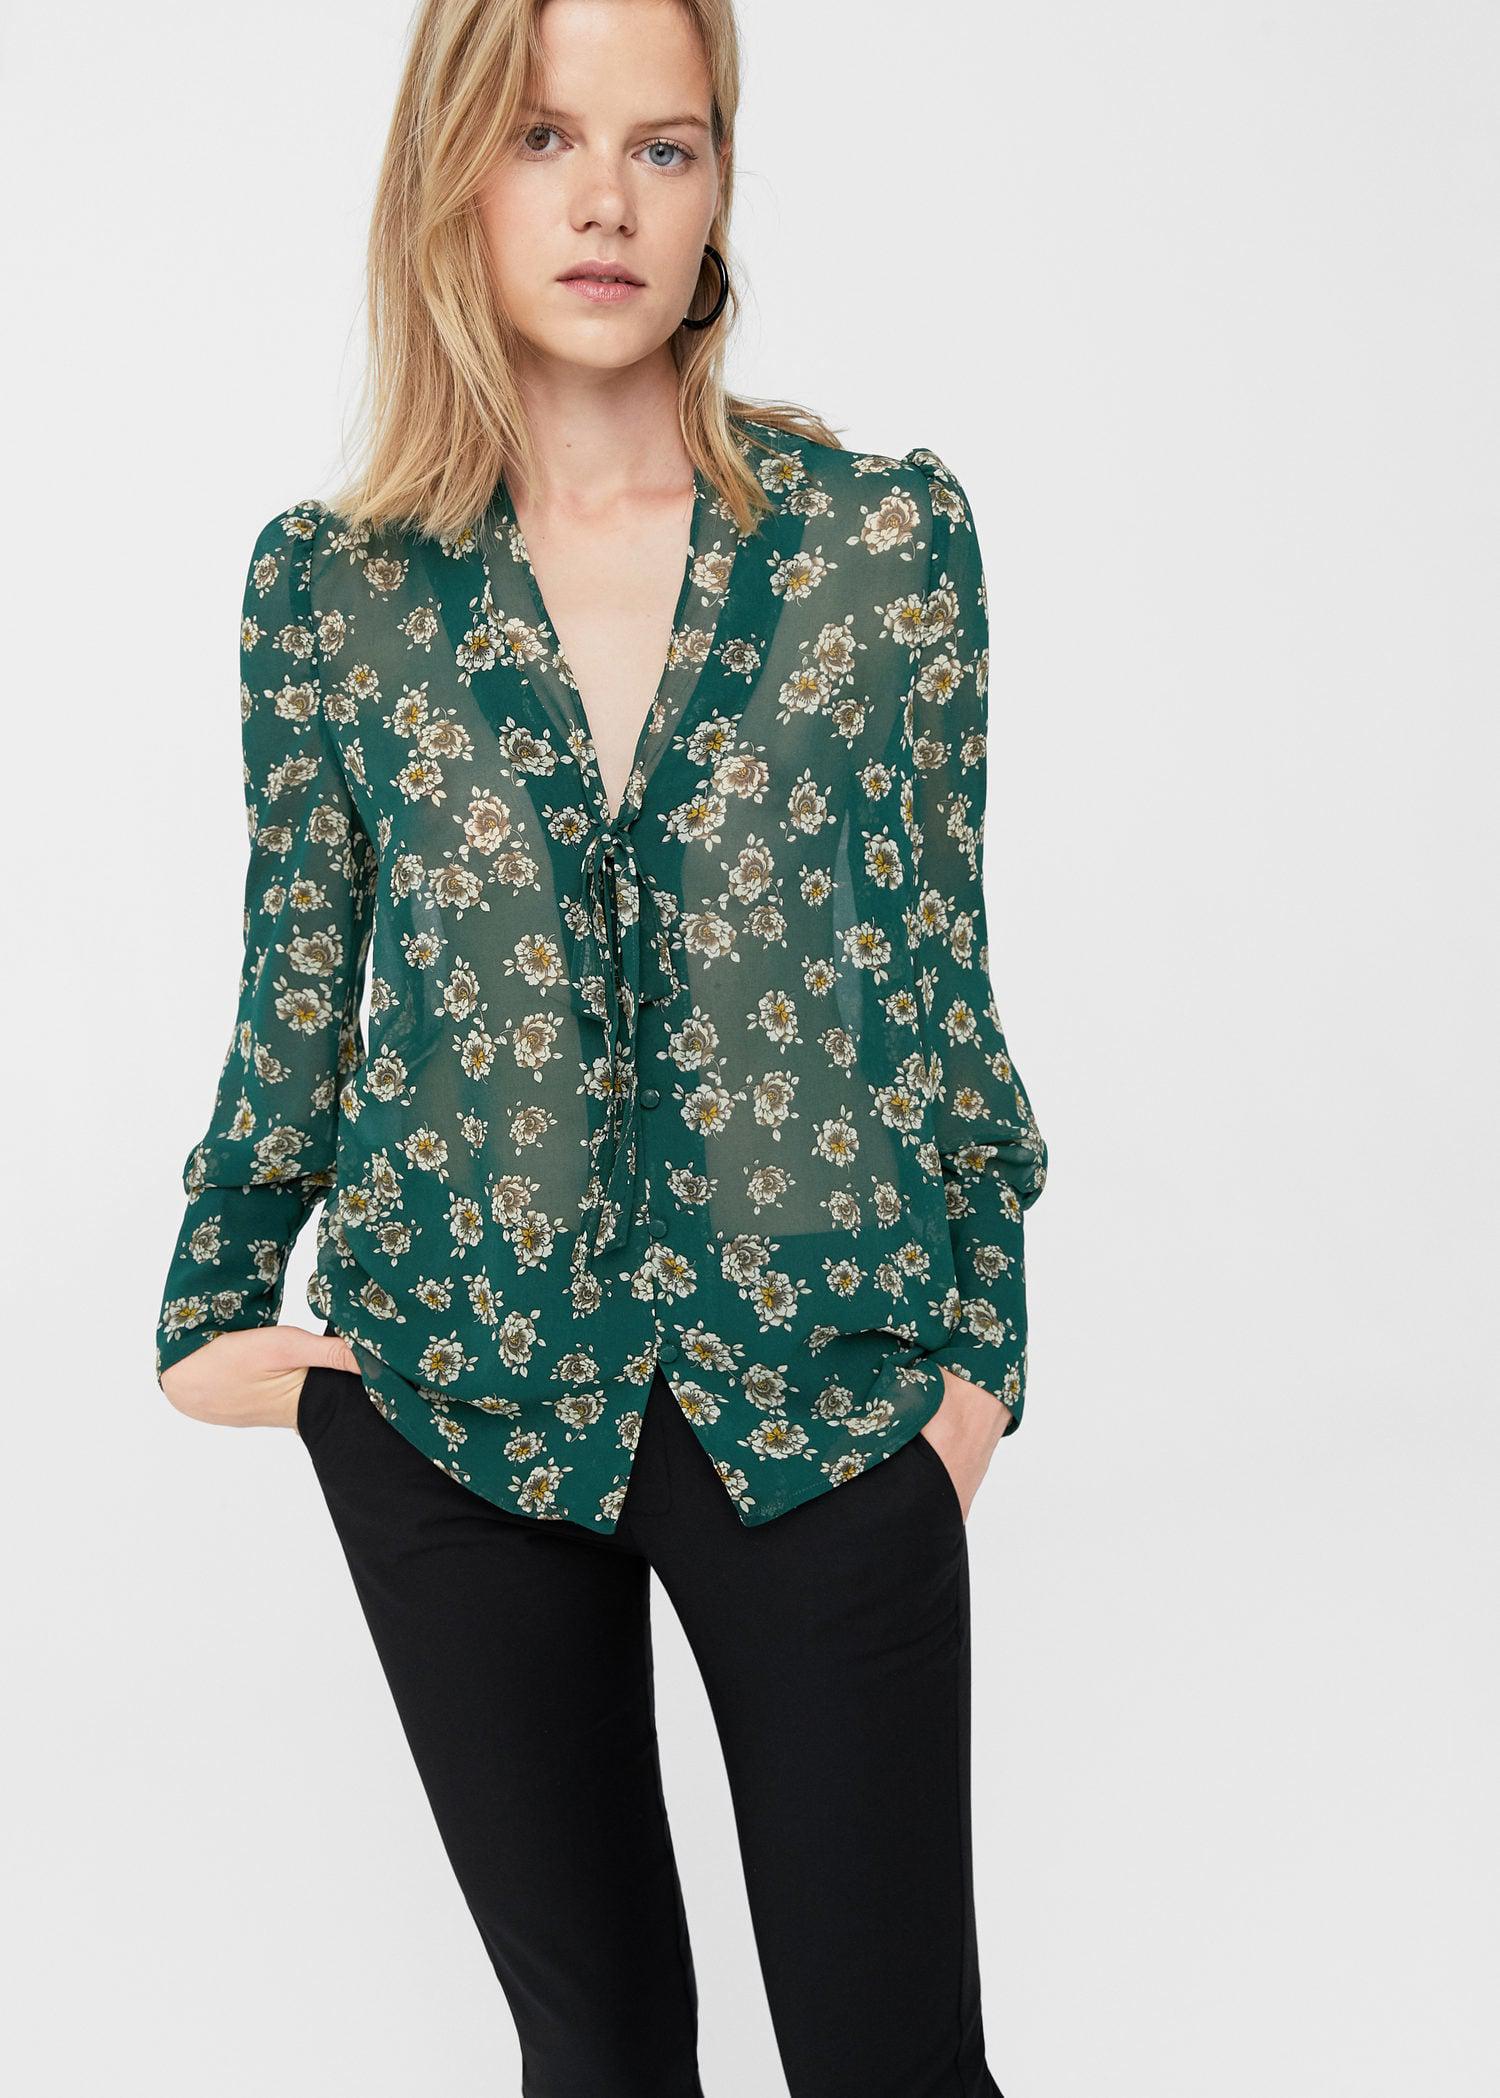 Lyst - Mango Floral Print Blouse in Green